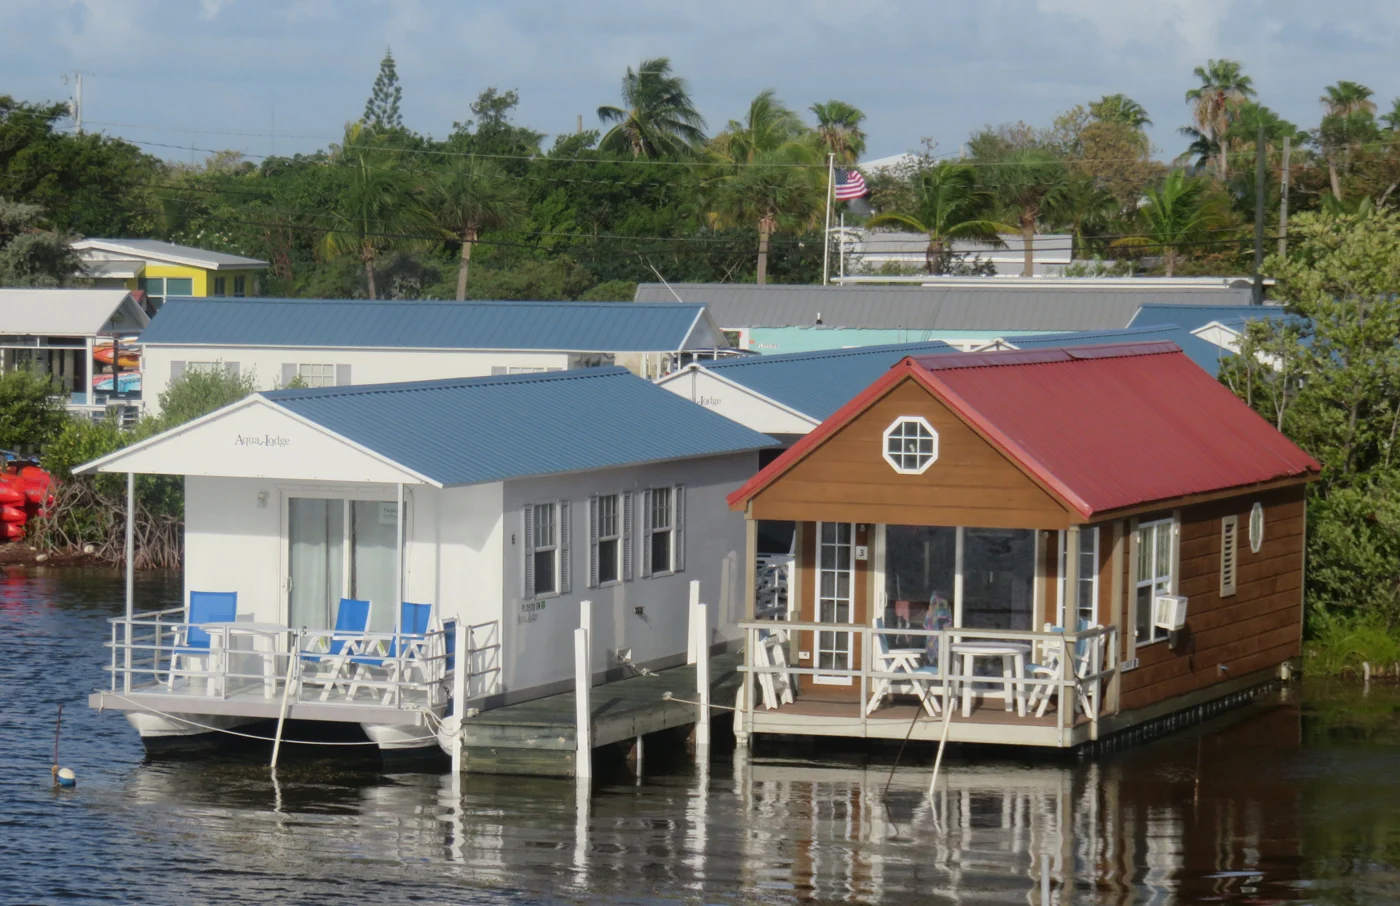 Houseboats at the Old Wooden Bridge Resort and Marina, as viewed from the bridge connecting Big Pine Key to No Name Key. (Photo: Bonnie Gross)